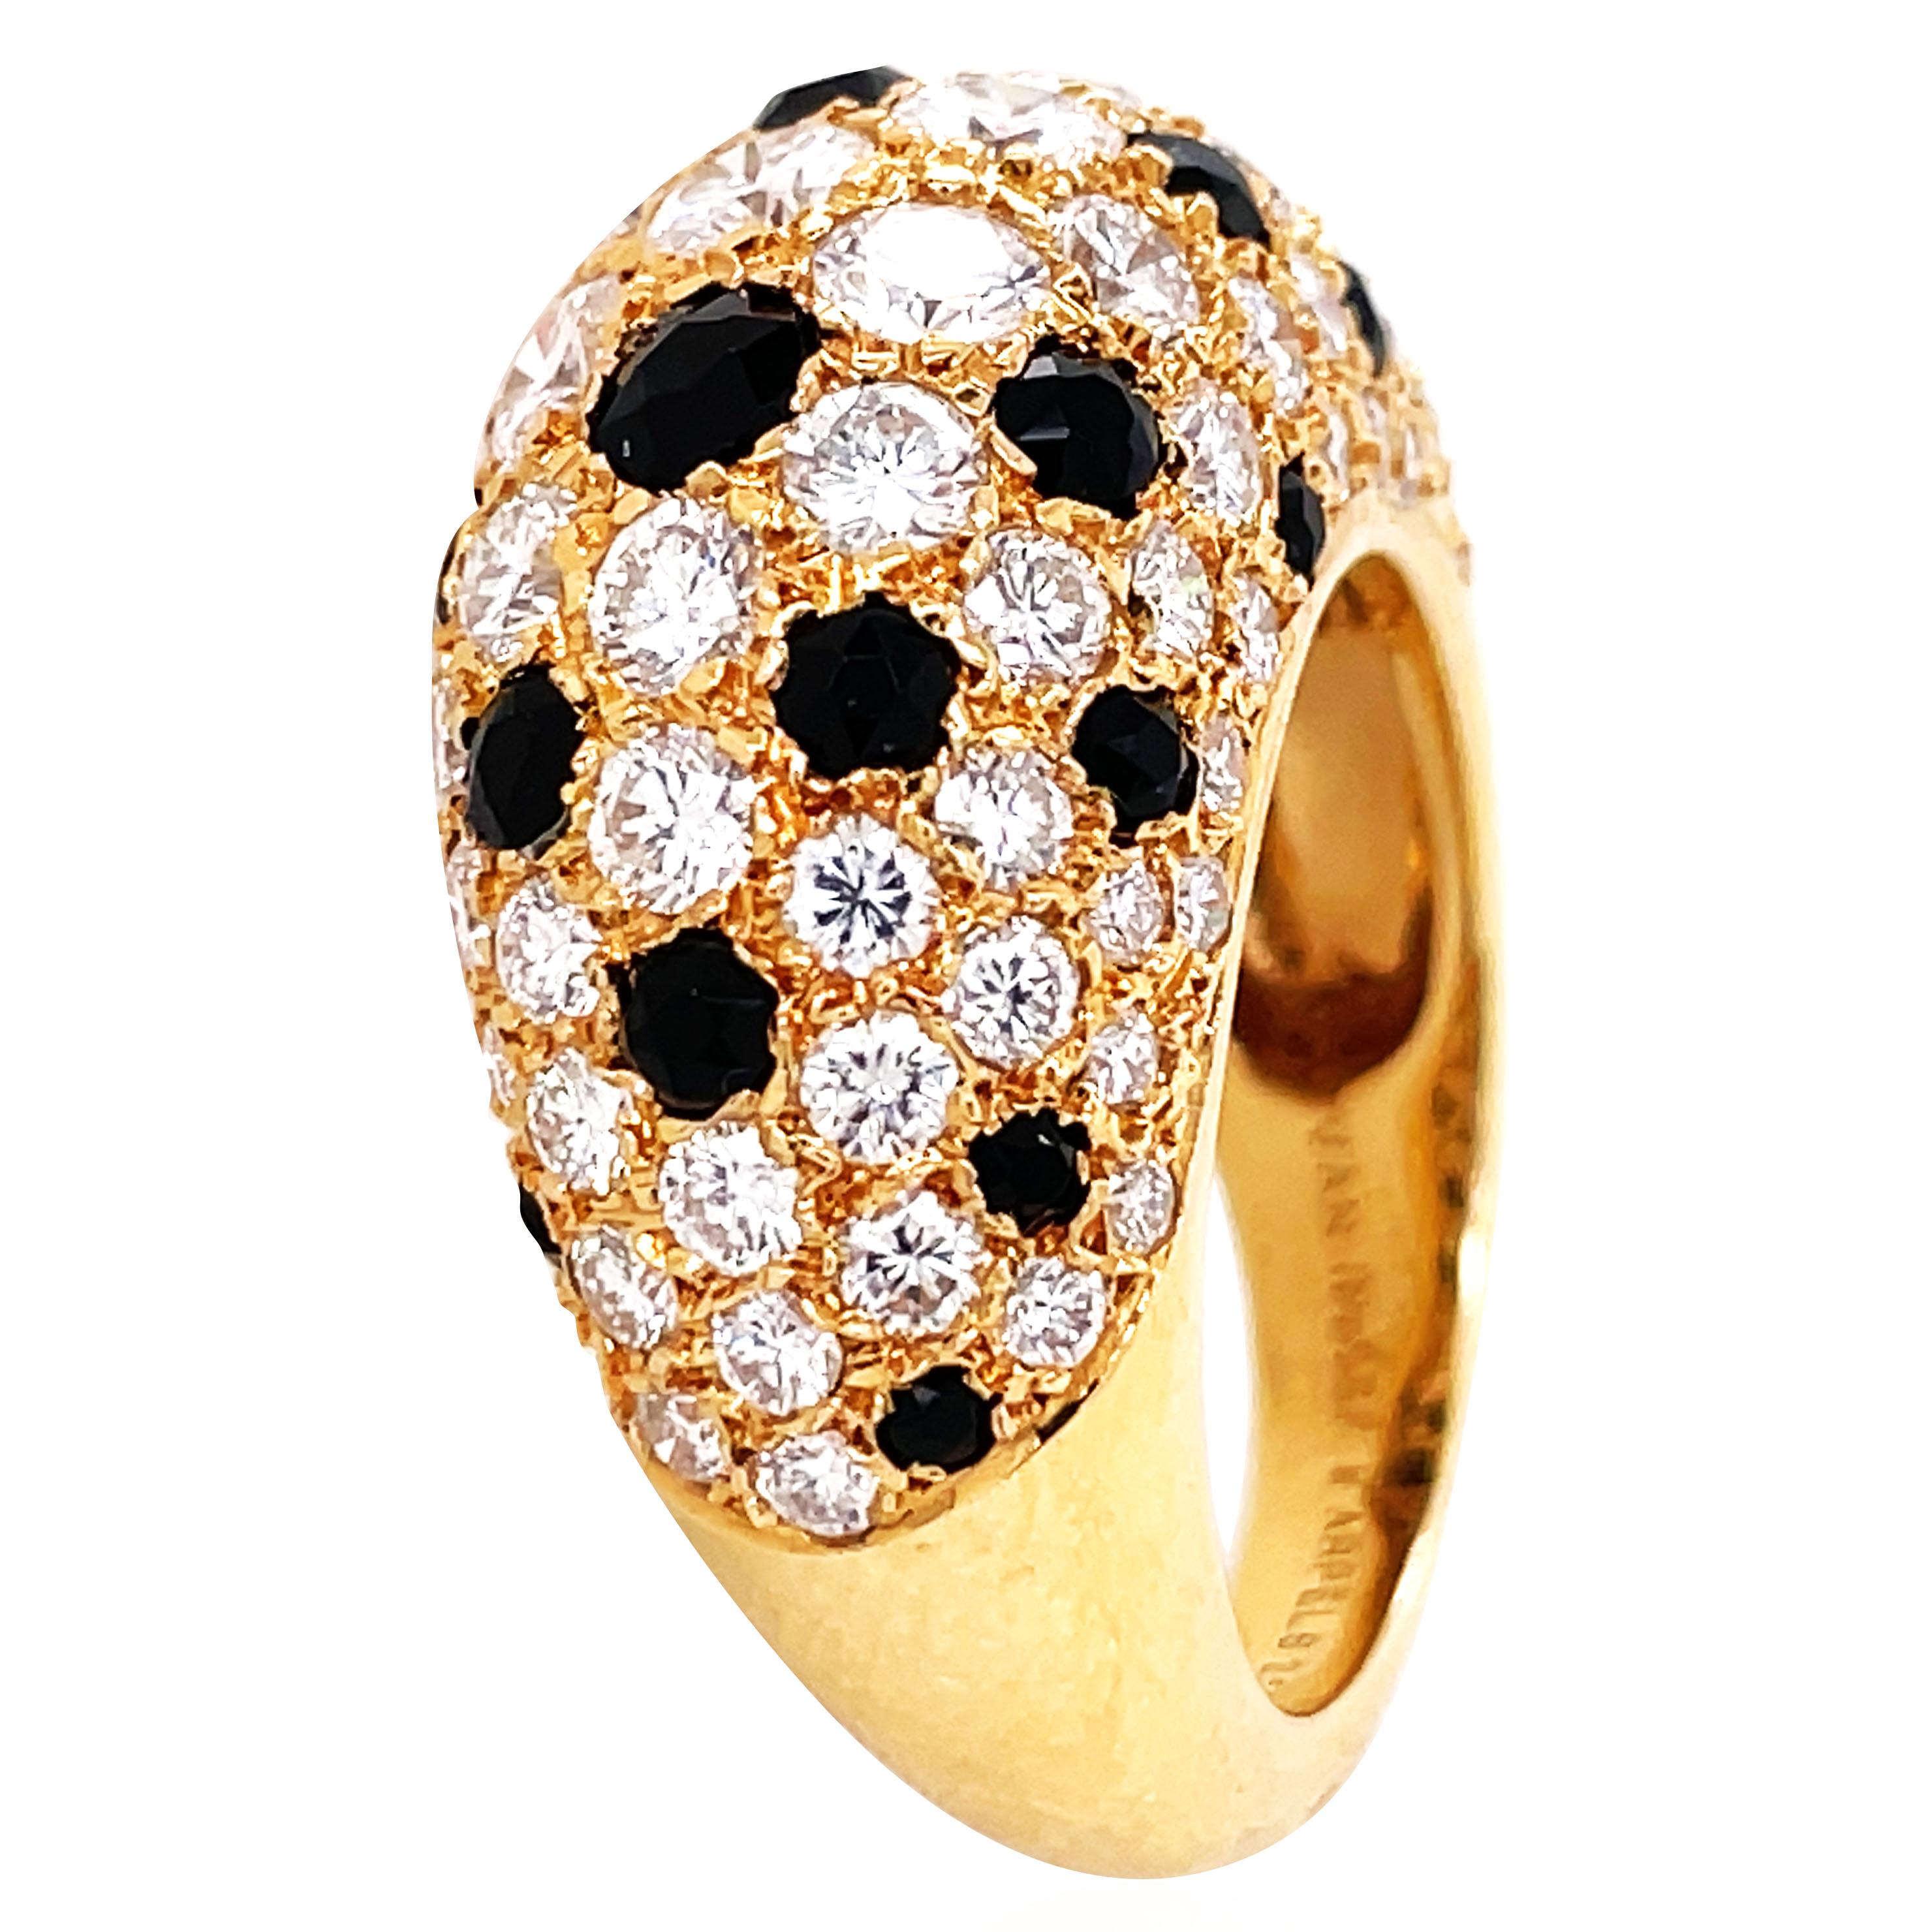 This VCA onyx diamond ring is crafted in 18k gold. It consists of 24 onyx and 83 round-cut diamonds. Diamond totally approx. 2.54ct.

Diamond: 2.54ct
Weight: 8.5 grams
Measurement: 5.75
Stamp: 